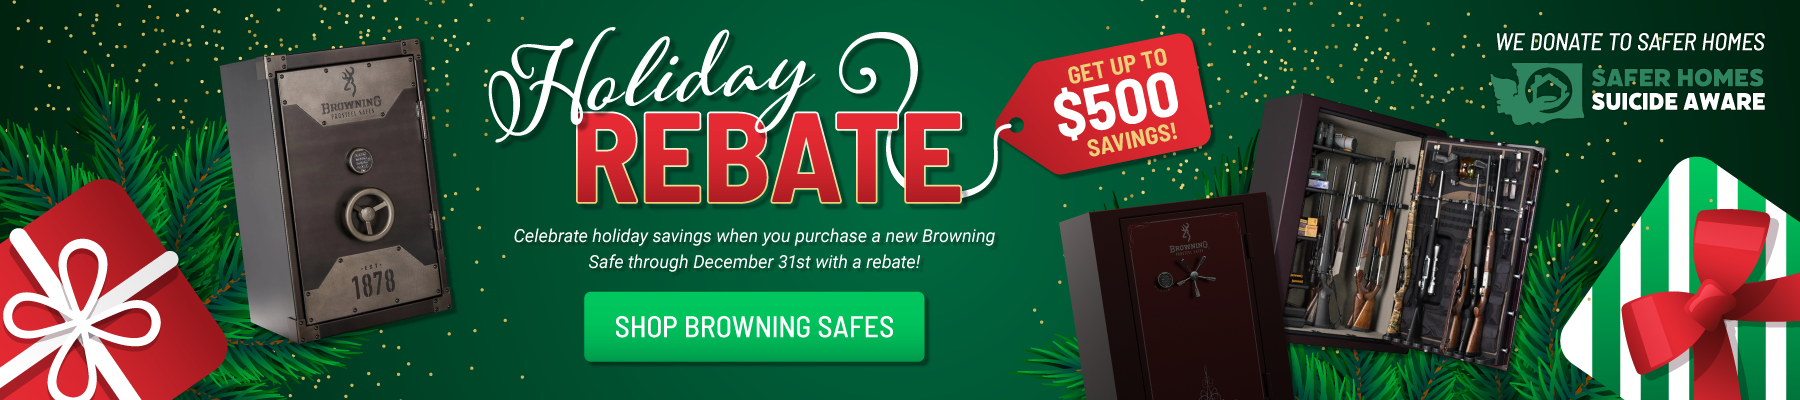 Browning Holiday Rebate - Get up to $500 Off